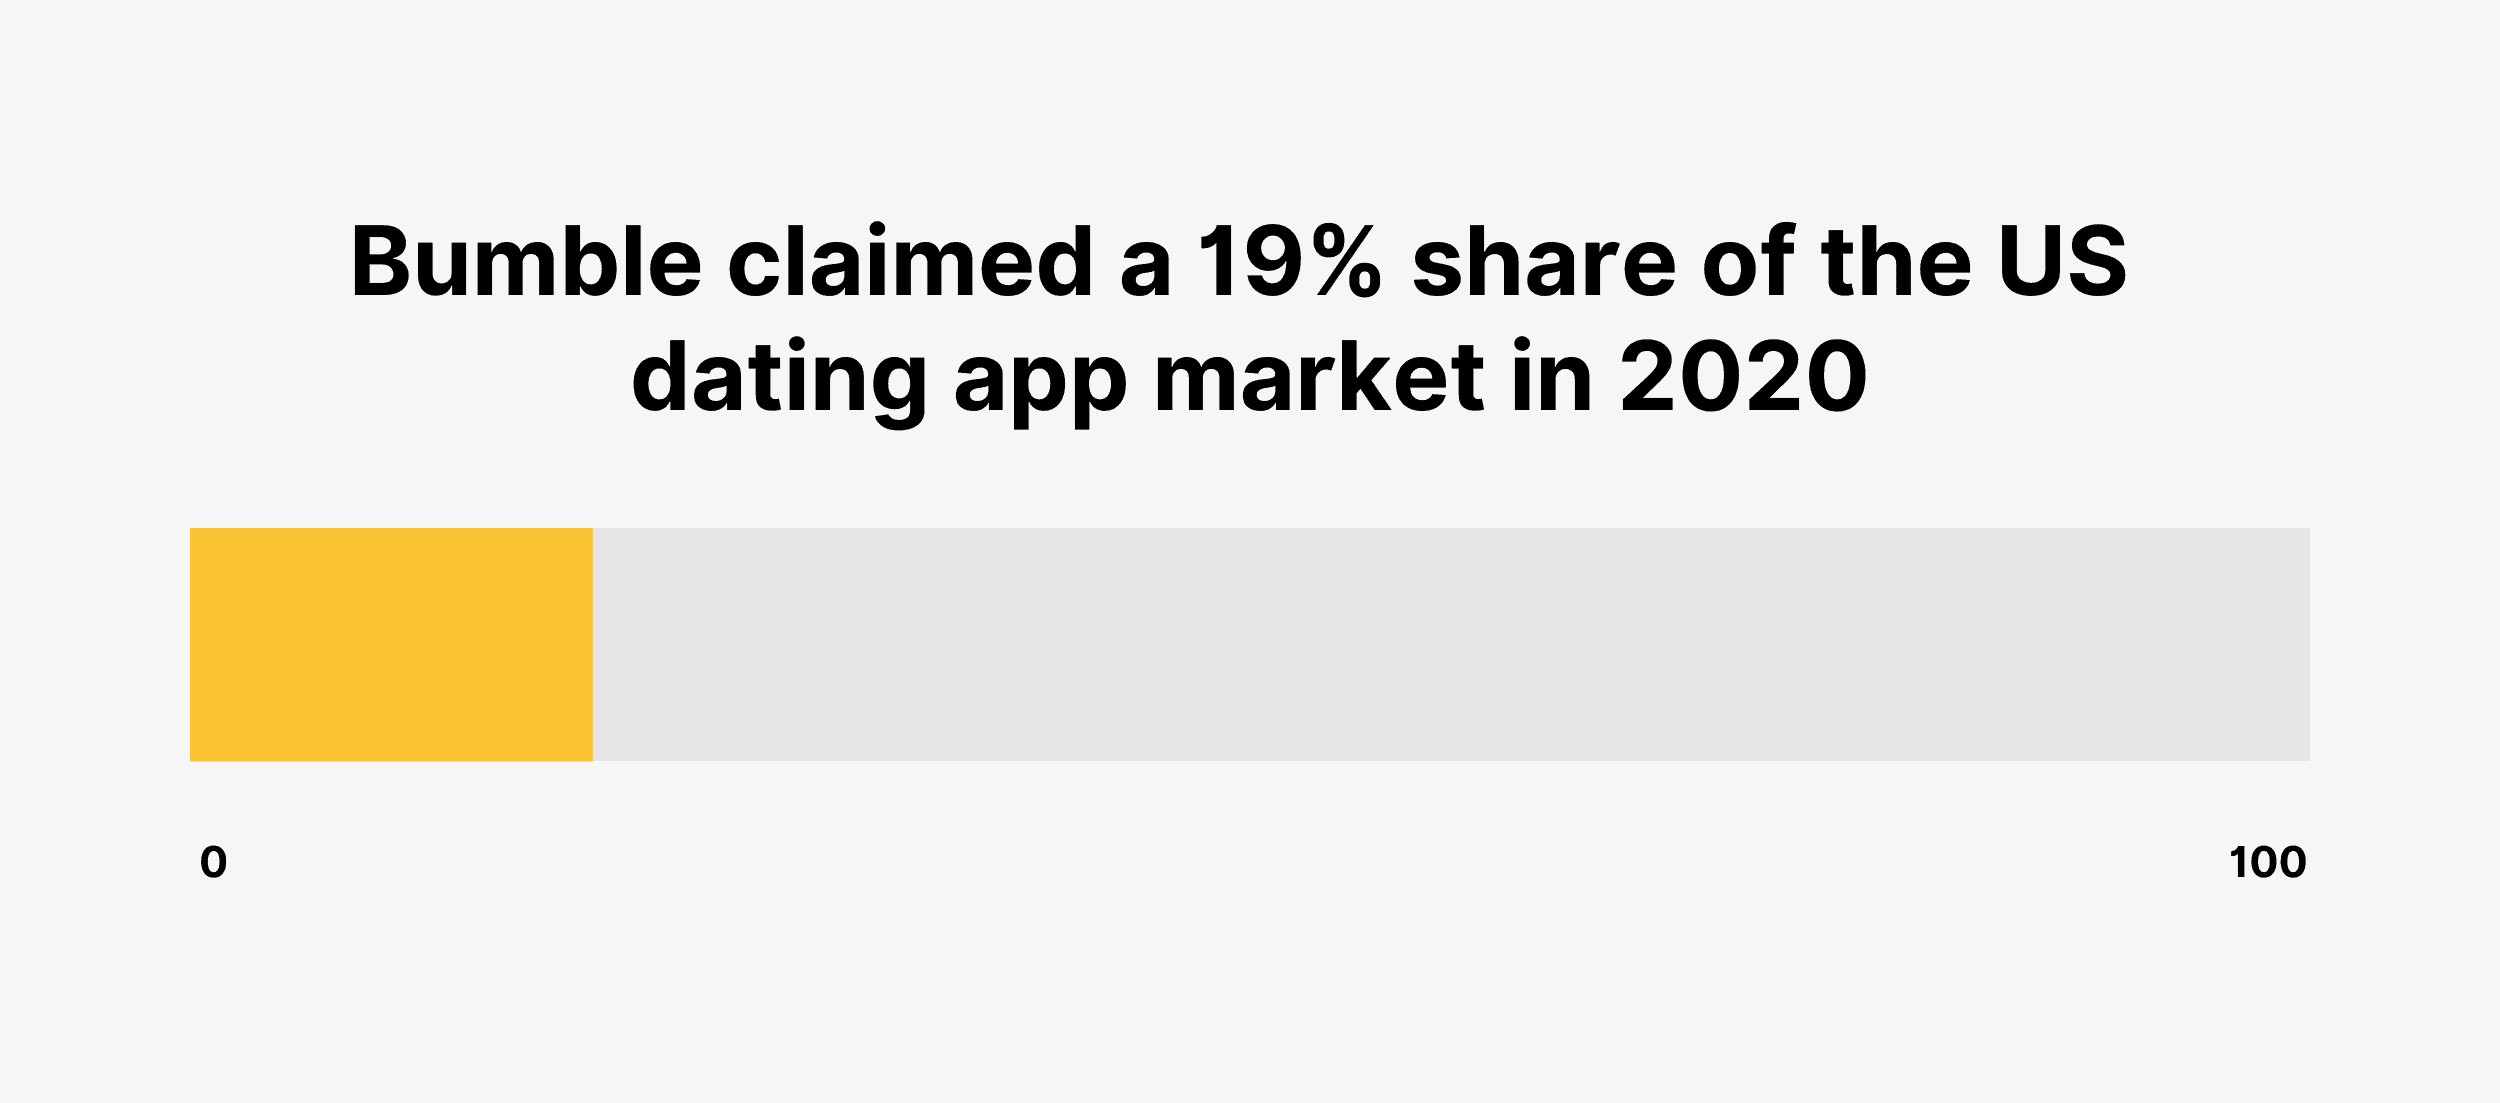 Bumble claimed a 19% share of the US dating app market in 2020